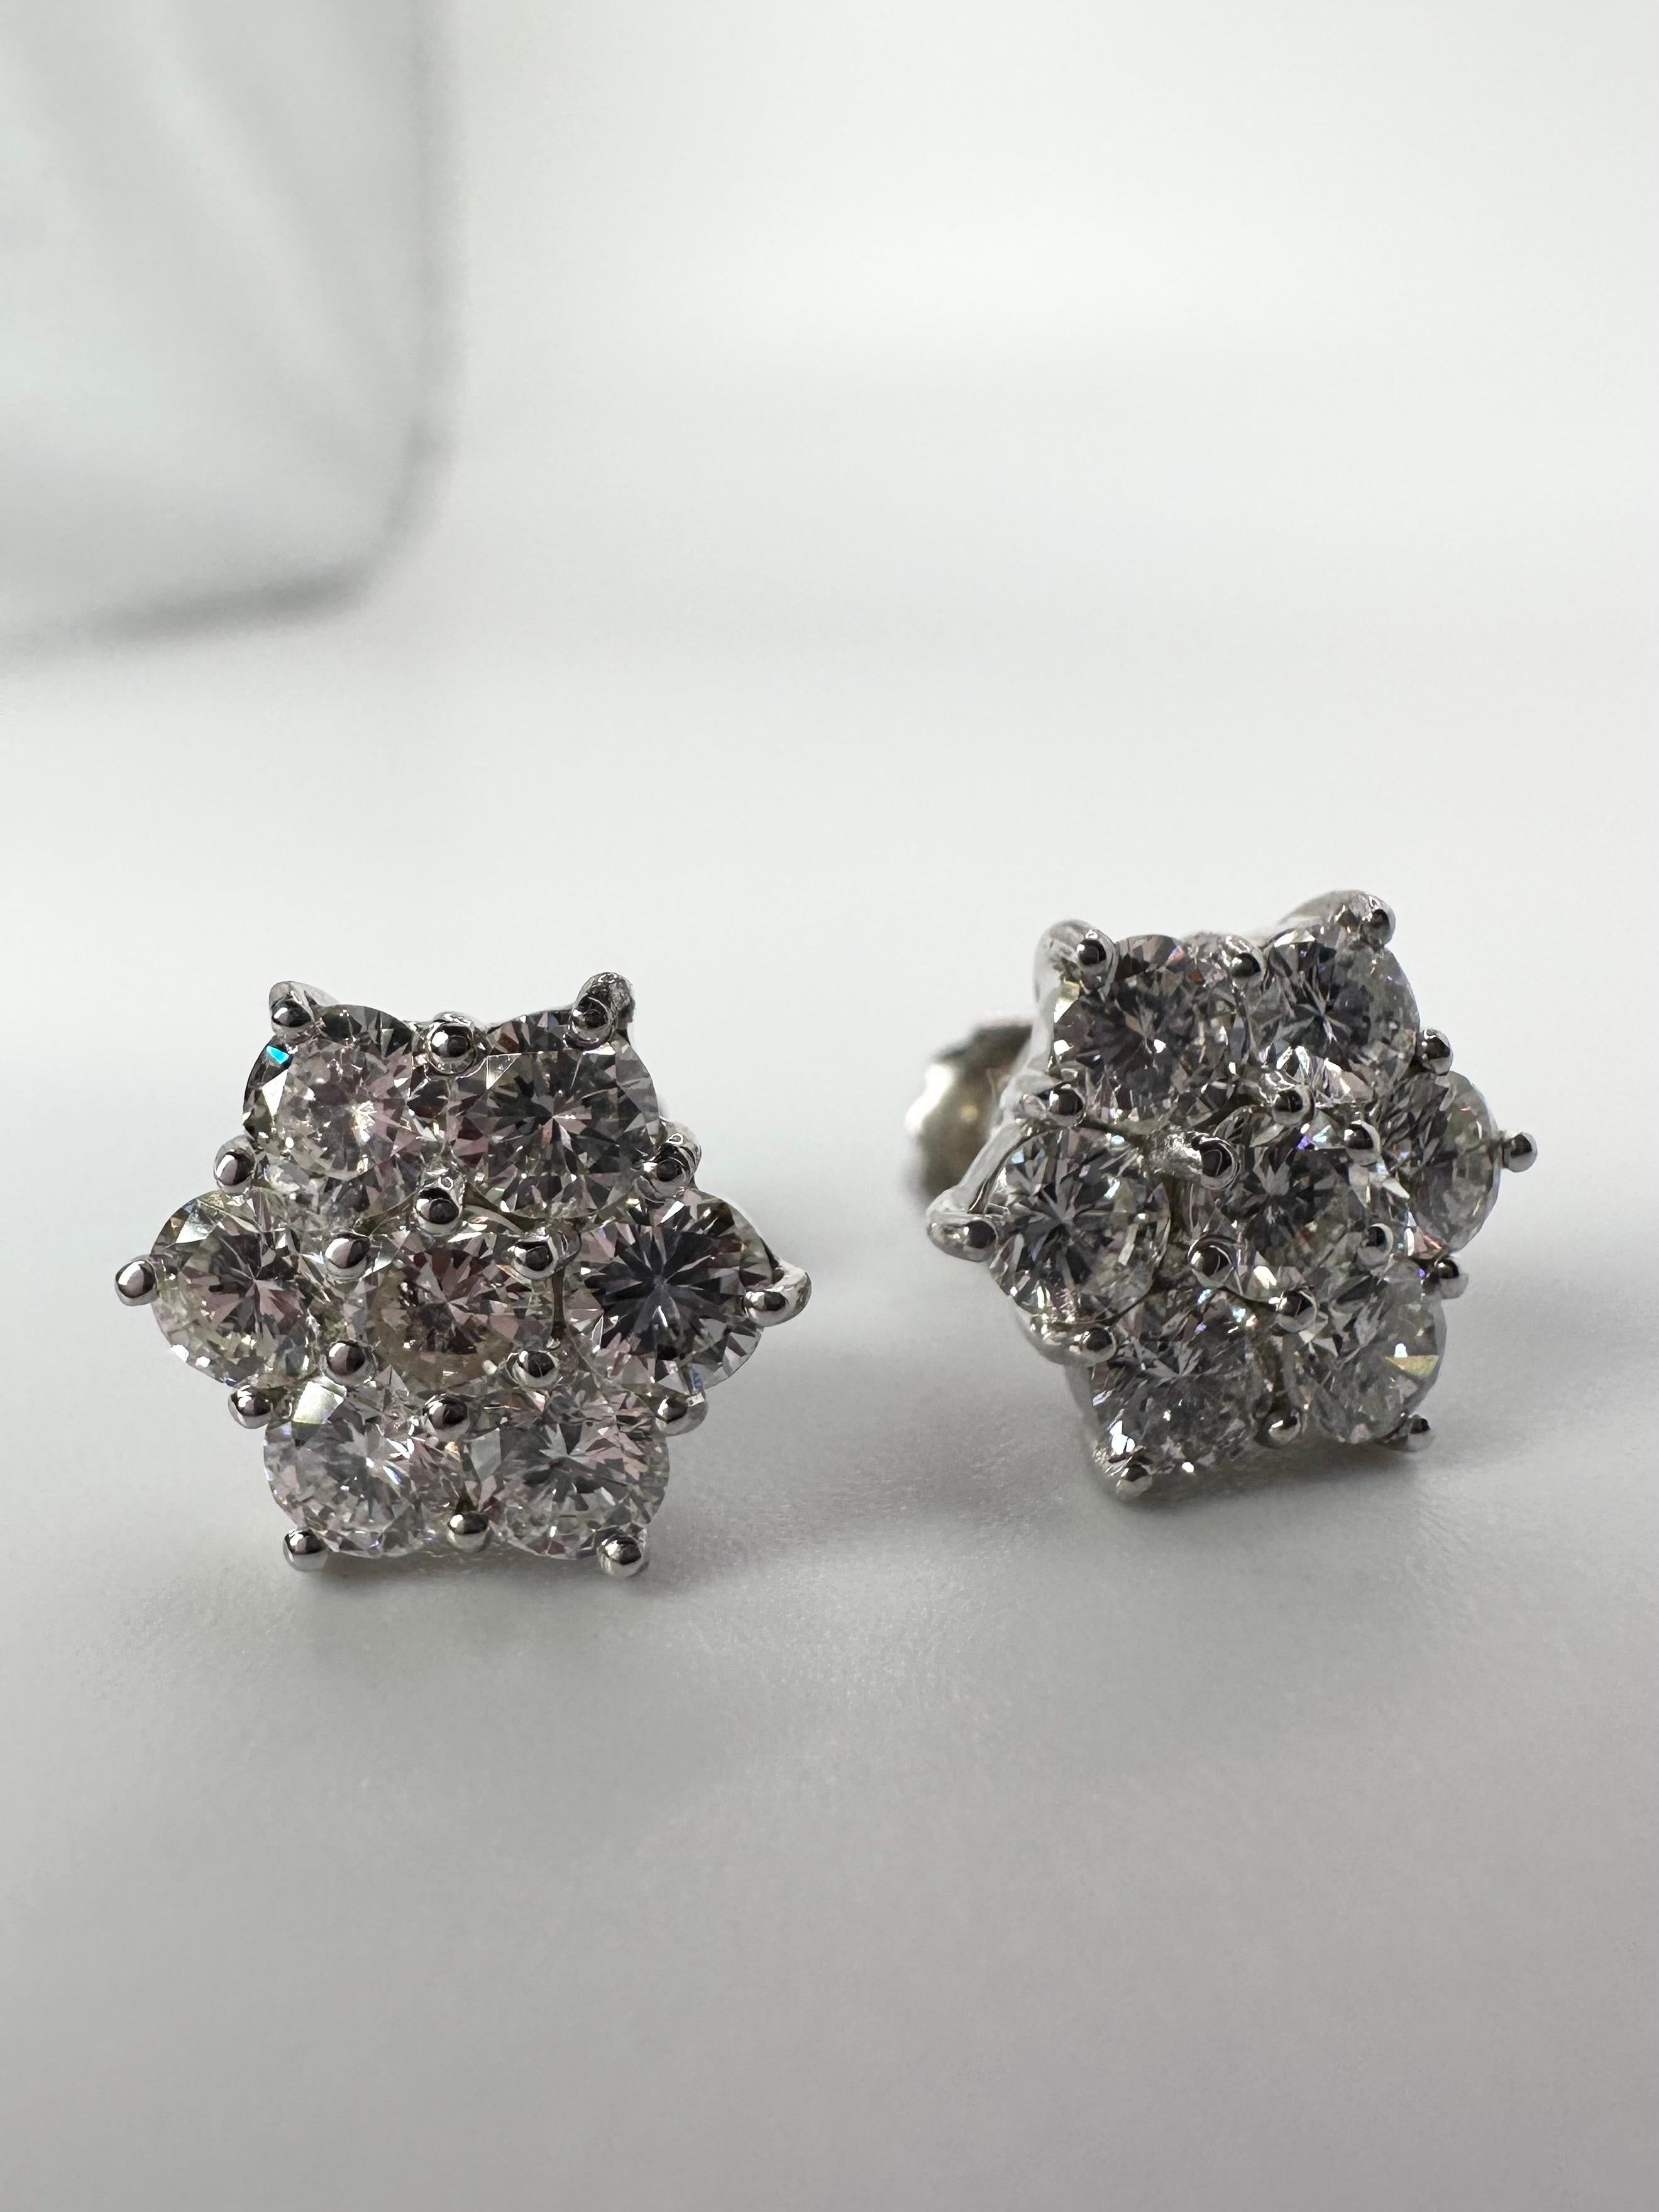 Stunning diamond earrings in 14KT white gold. Comfortable screw back closure.

GOLD: 14KT gold
NATURAL DIAMOND(S)
Clarity/Color: VS-SI/G
Carat:1ct
Cut:Round Brilliant
Grams:5


WHAT YOU GET AT STAMPAR JEWELERS:
Stampar Jewelers, located in the heart